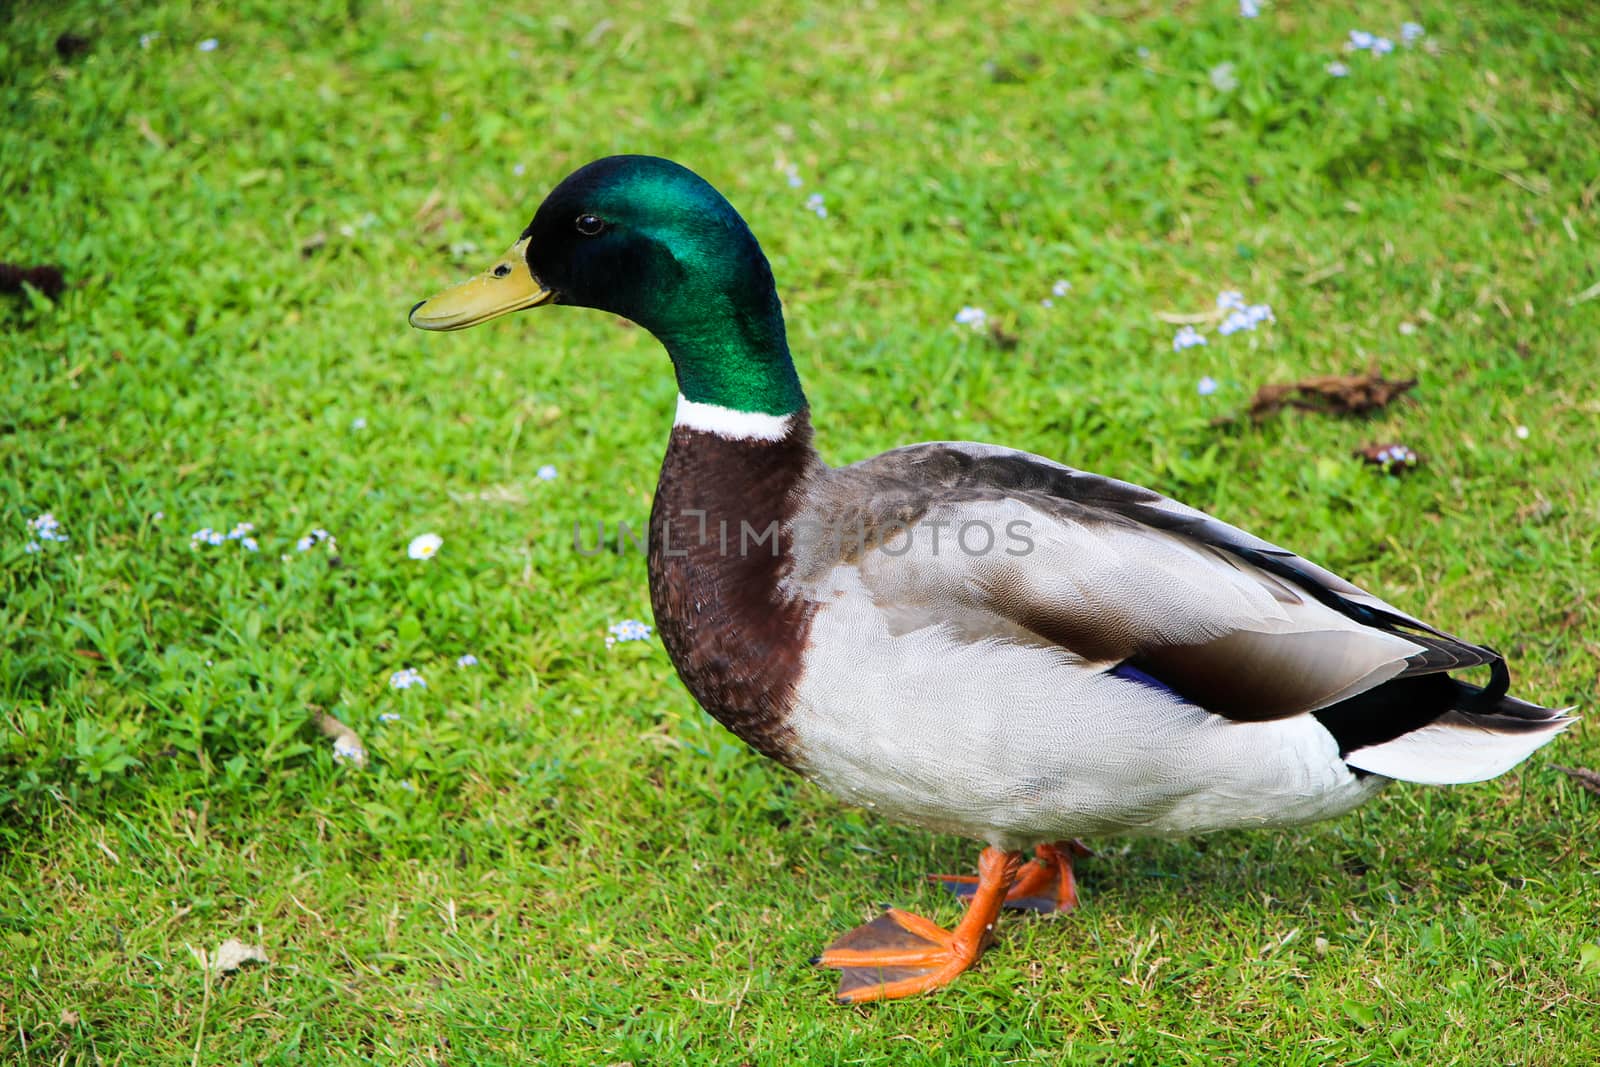 Male duck standing on green grass in park in spring.